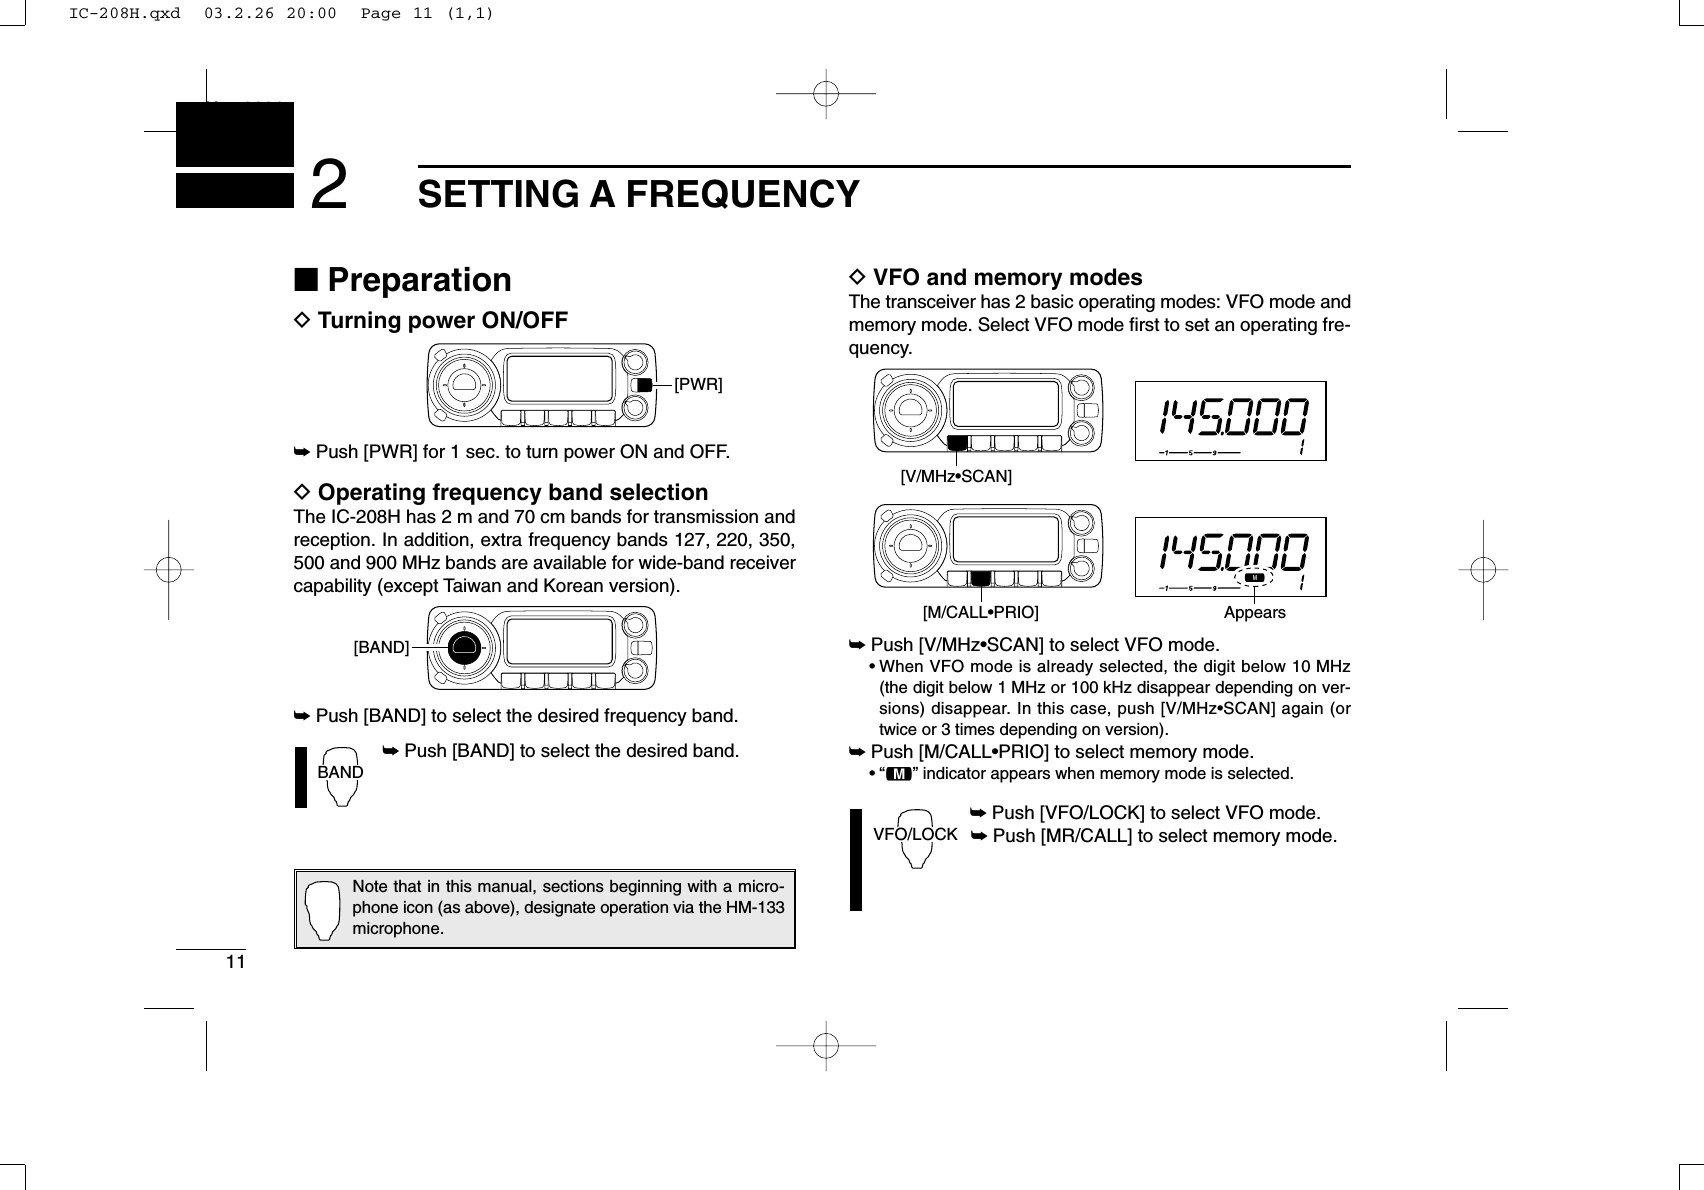 11SETTING A FREQUENCYNew20012■PreparationDTurning power ON/OFF➥Push [PWR] for 1 sec. to turn power ON and OFF.DOperating frequency band selectionThe IC-208H has 2 m and 70 cm bands for transmission andreception. In addition, extra frequency bands 127, 220, 350,500 and 900 MHz bands are available for wide-band receivercapability (except Taiwan and Korean version).➥Push [BAND] to select the desired frequency band.➥Push [BAND] to select the desired band.DVFO and memory modesThe transceiver has 2 basic operating modes: VFO mode andmemory mode. Select VFO mode ﬁrst to set an operating fre-quency.➥Push [V/MHz•SCAN] to select VFO mode.•When VFO mode is already selected, the digit below 10 MHz(the digit below 1 MHz or 100 kHz disappear depending on ver-sions) disappear. In this case, push [V/MHz•SCAN] again (ortwice or 3 times depending on version).➥Push [M/CALL•PRIO] to select memory mode.•“!” indicator appears when memory mode is selected.➥Push [VFO/LOCK] to select VFO mode.➥Push [MR/CALL] to select memory mode.VFO/LOCK[V/MHz•SCAN][M/CALL•PRIO] AppearsBAND[BAND][PWR]Note that in this manual, sections beginning with a micro-phone icon (as above), designate operation via the HM-133microphone.IC-208H.qxd  03.2.26 20:00  Page 11 (1,1)